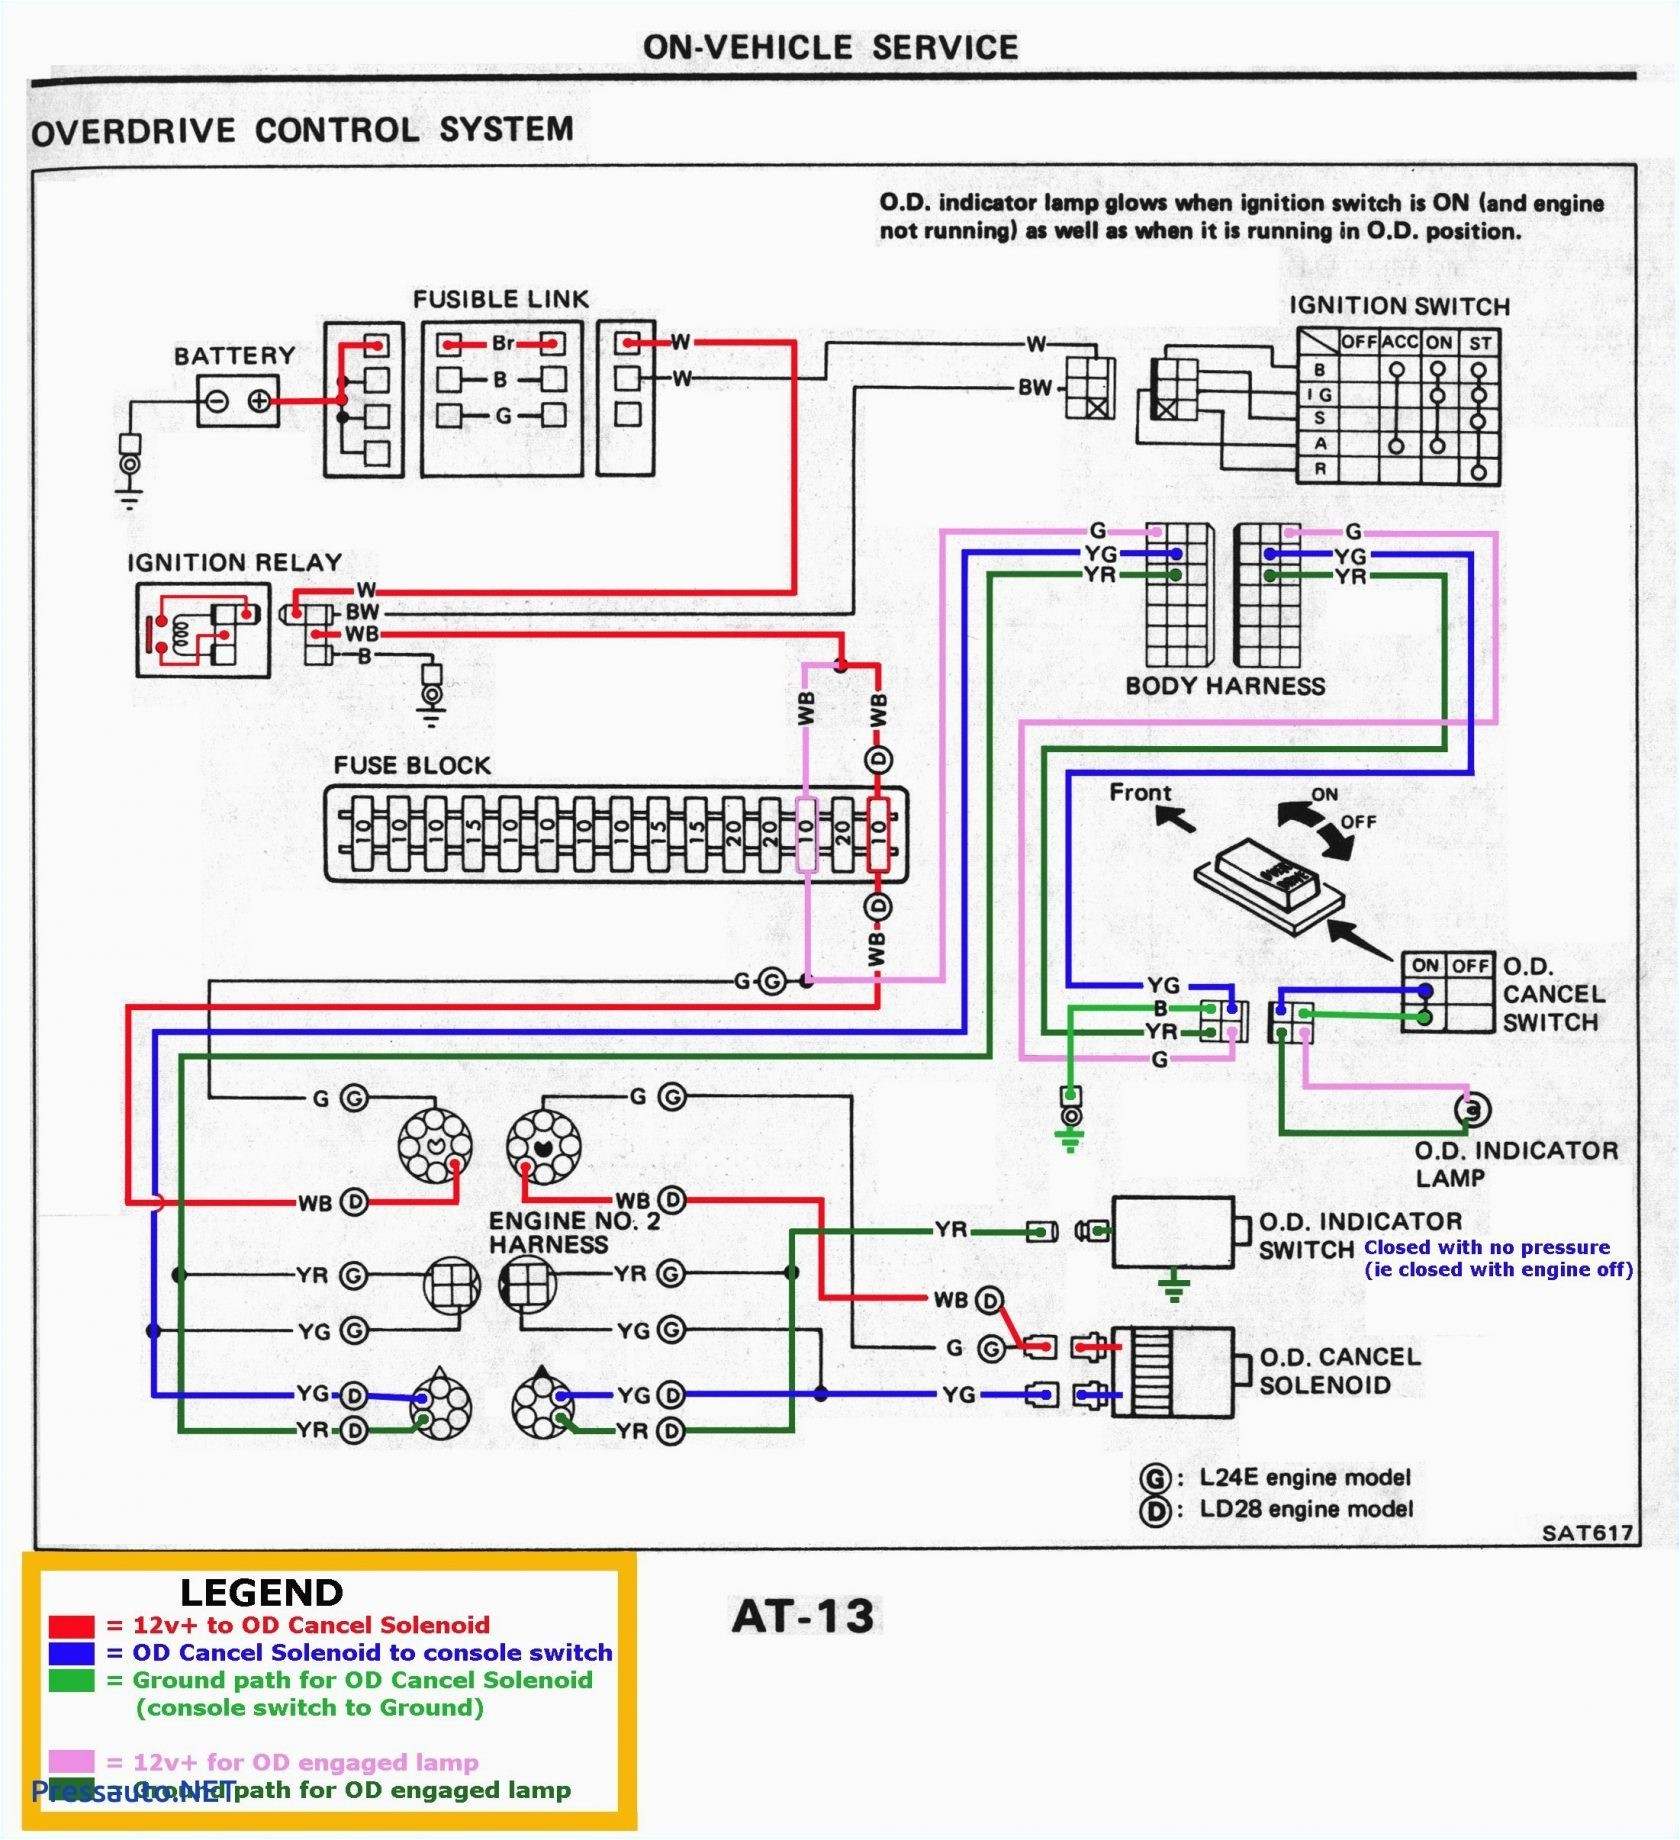 bmw technology guide wiring harness wiring diagrams konsult jvc car stereo wiring harness diagram car wiring harness diagram